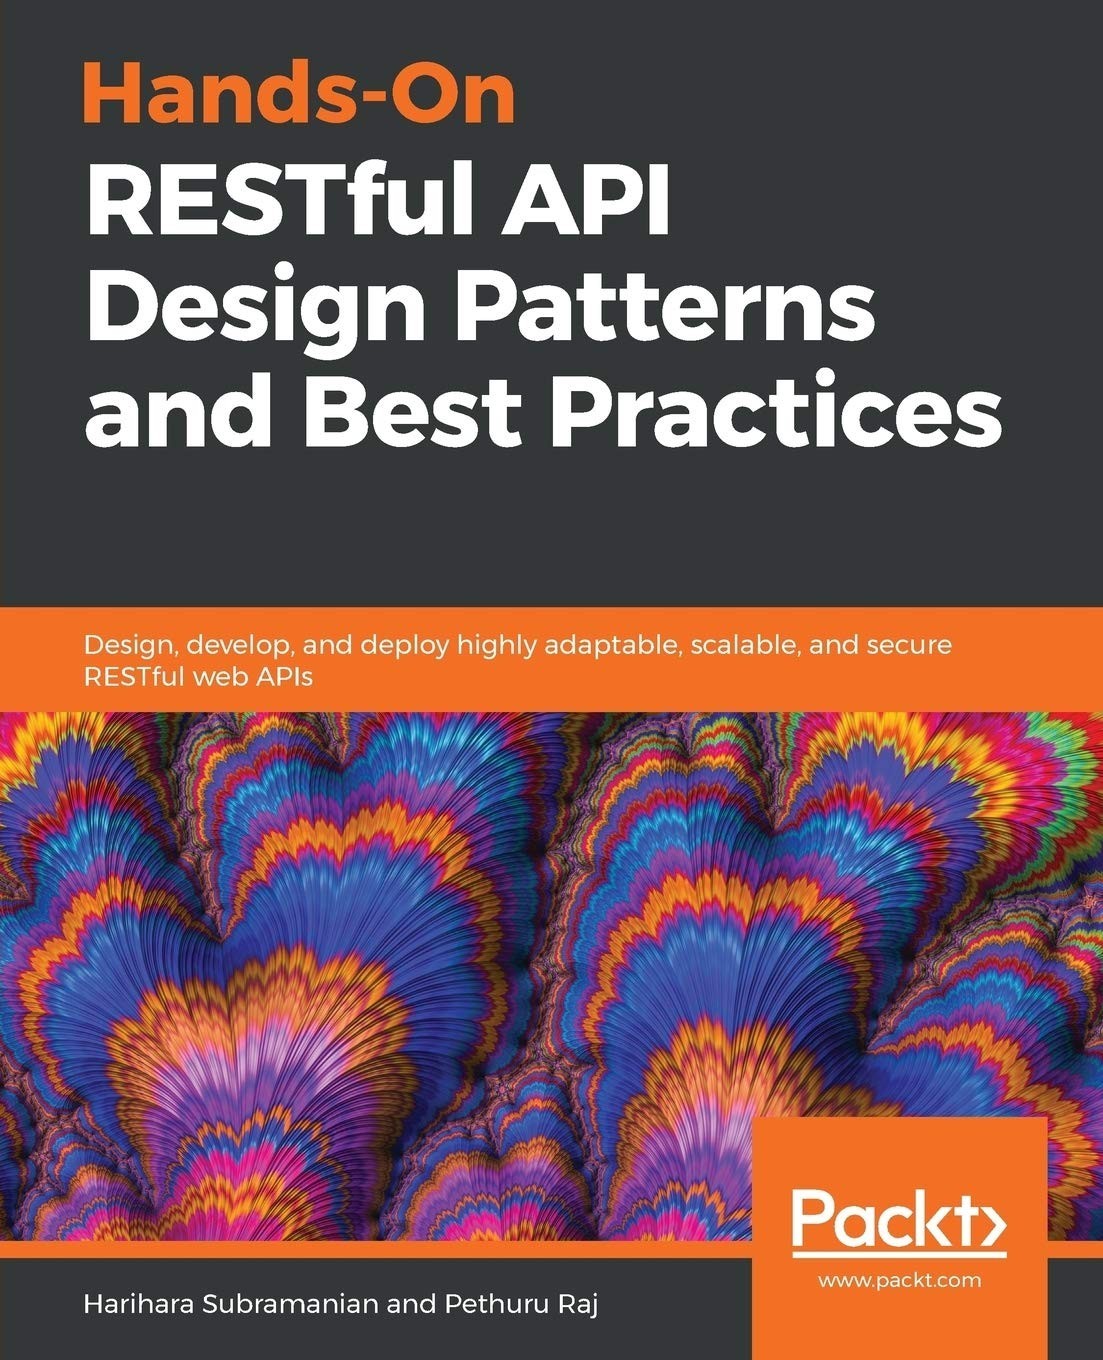 Hands-On RESTful API Design Patterns and Best Practices: Design, Develop, and Deploy Highly Adaptable, Scalable, and Secure RESTful Web APIs